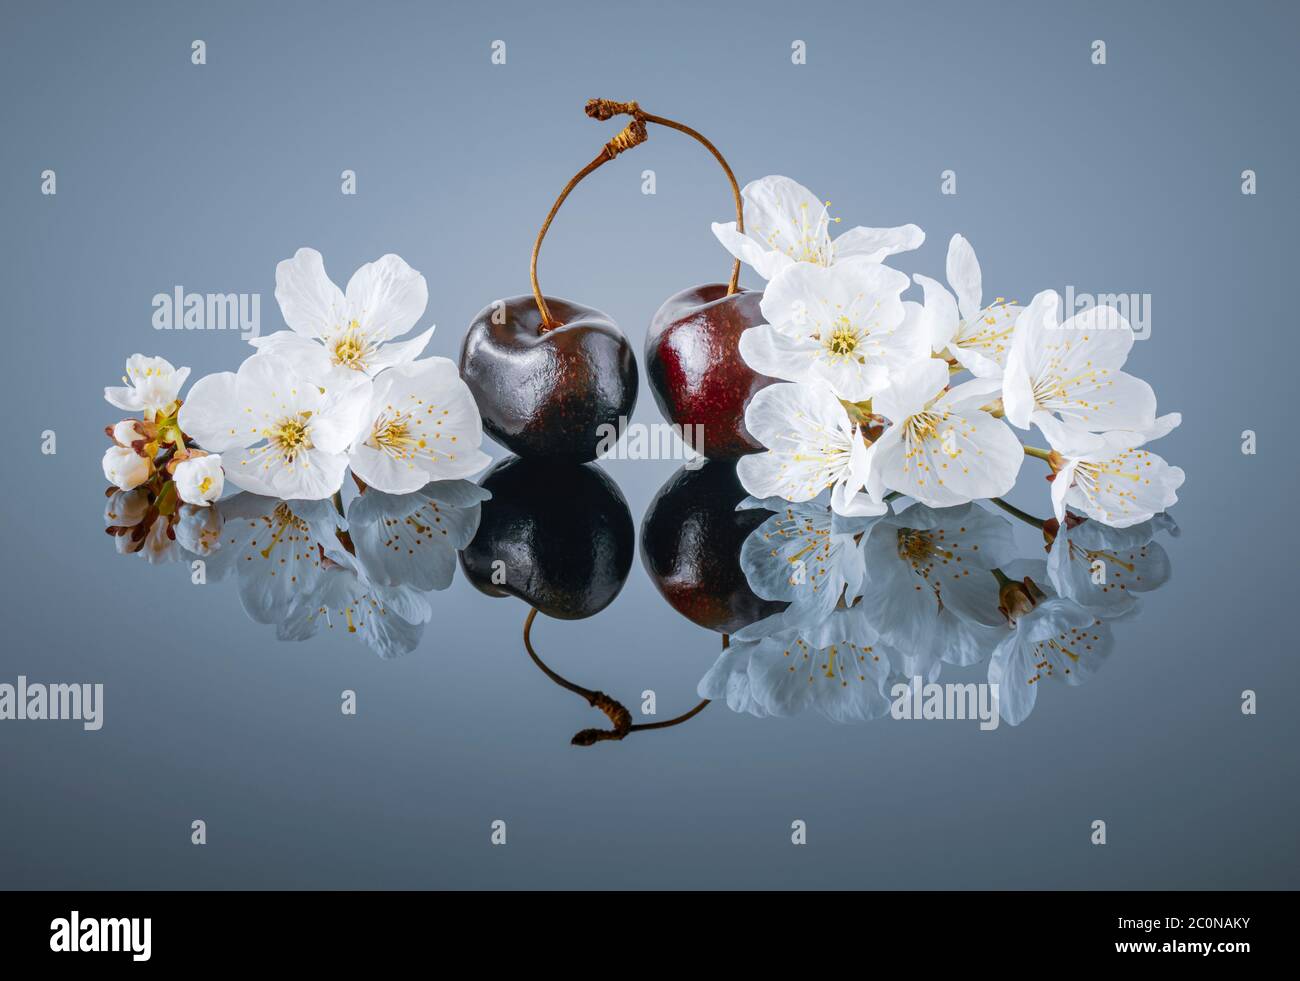 Red Cherries and Cherry tree Blossom , showing to different seasons Stock Photo